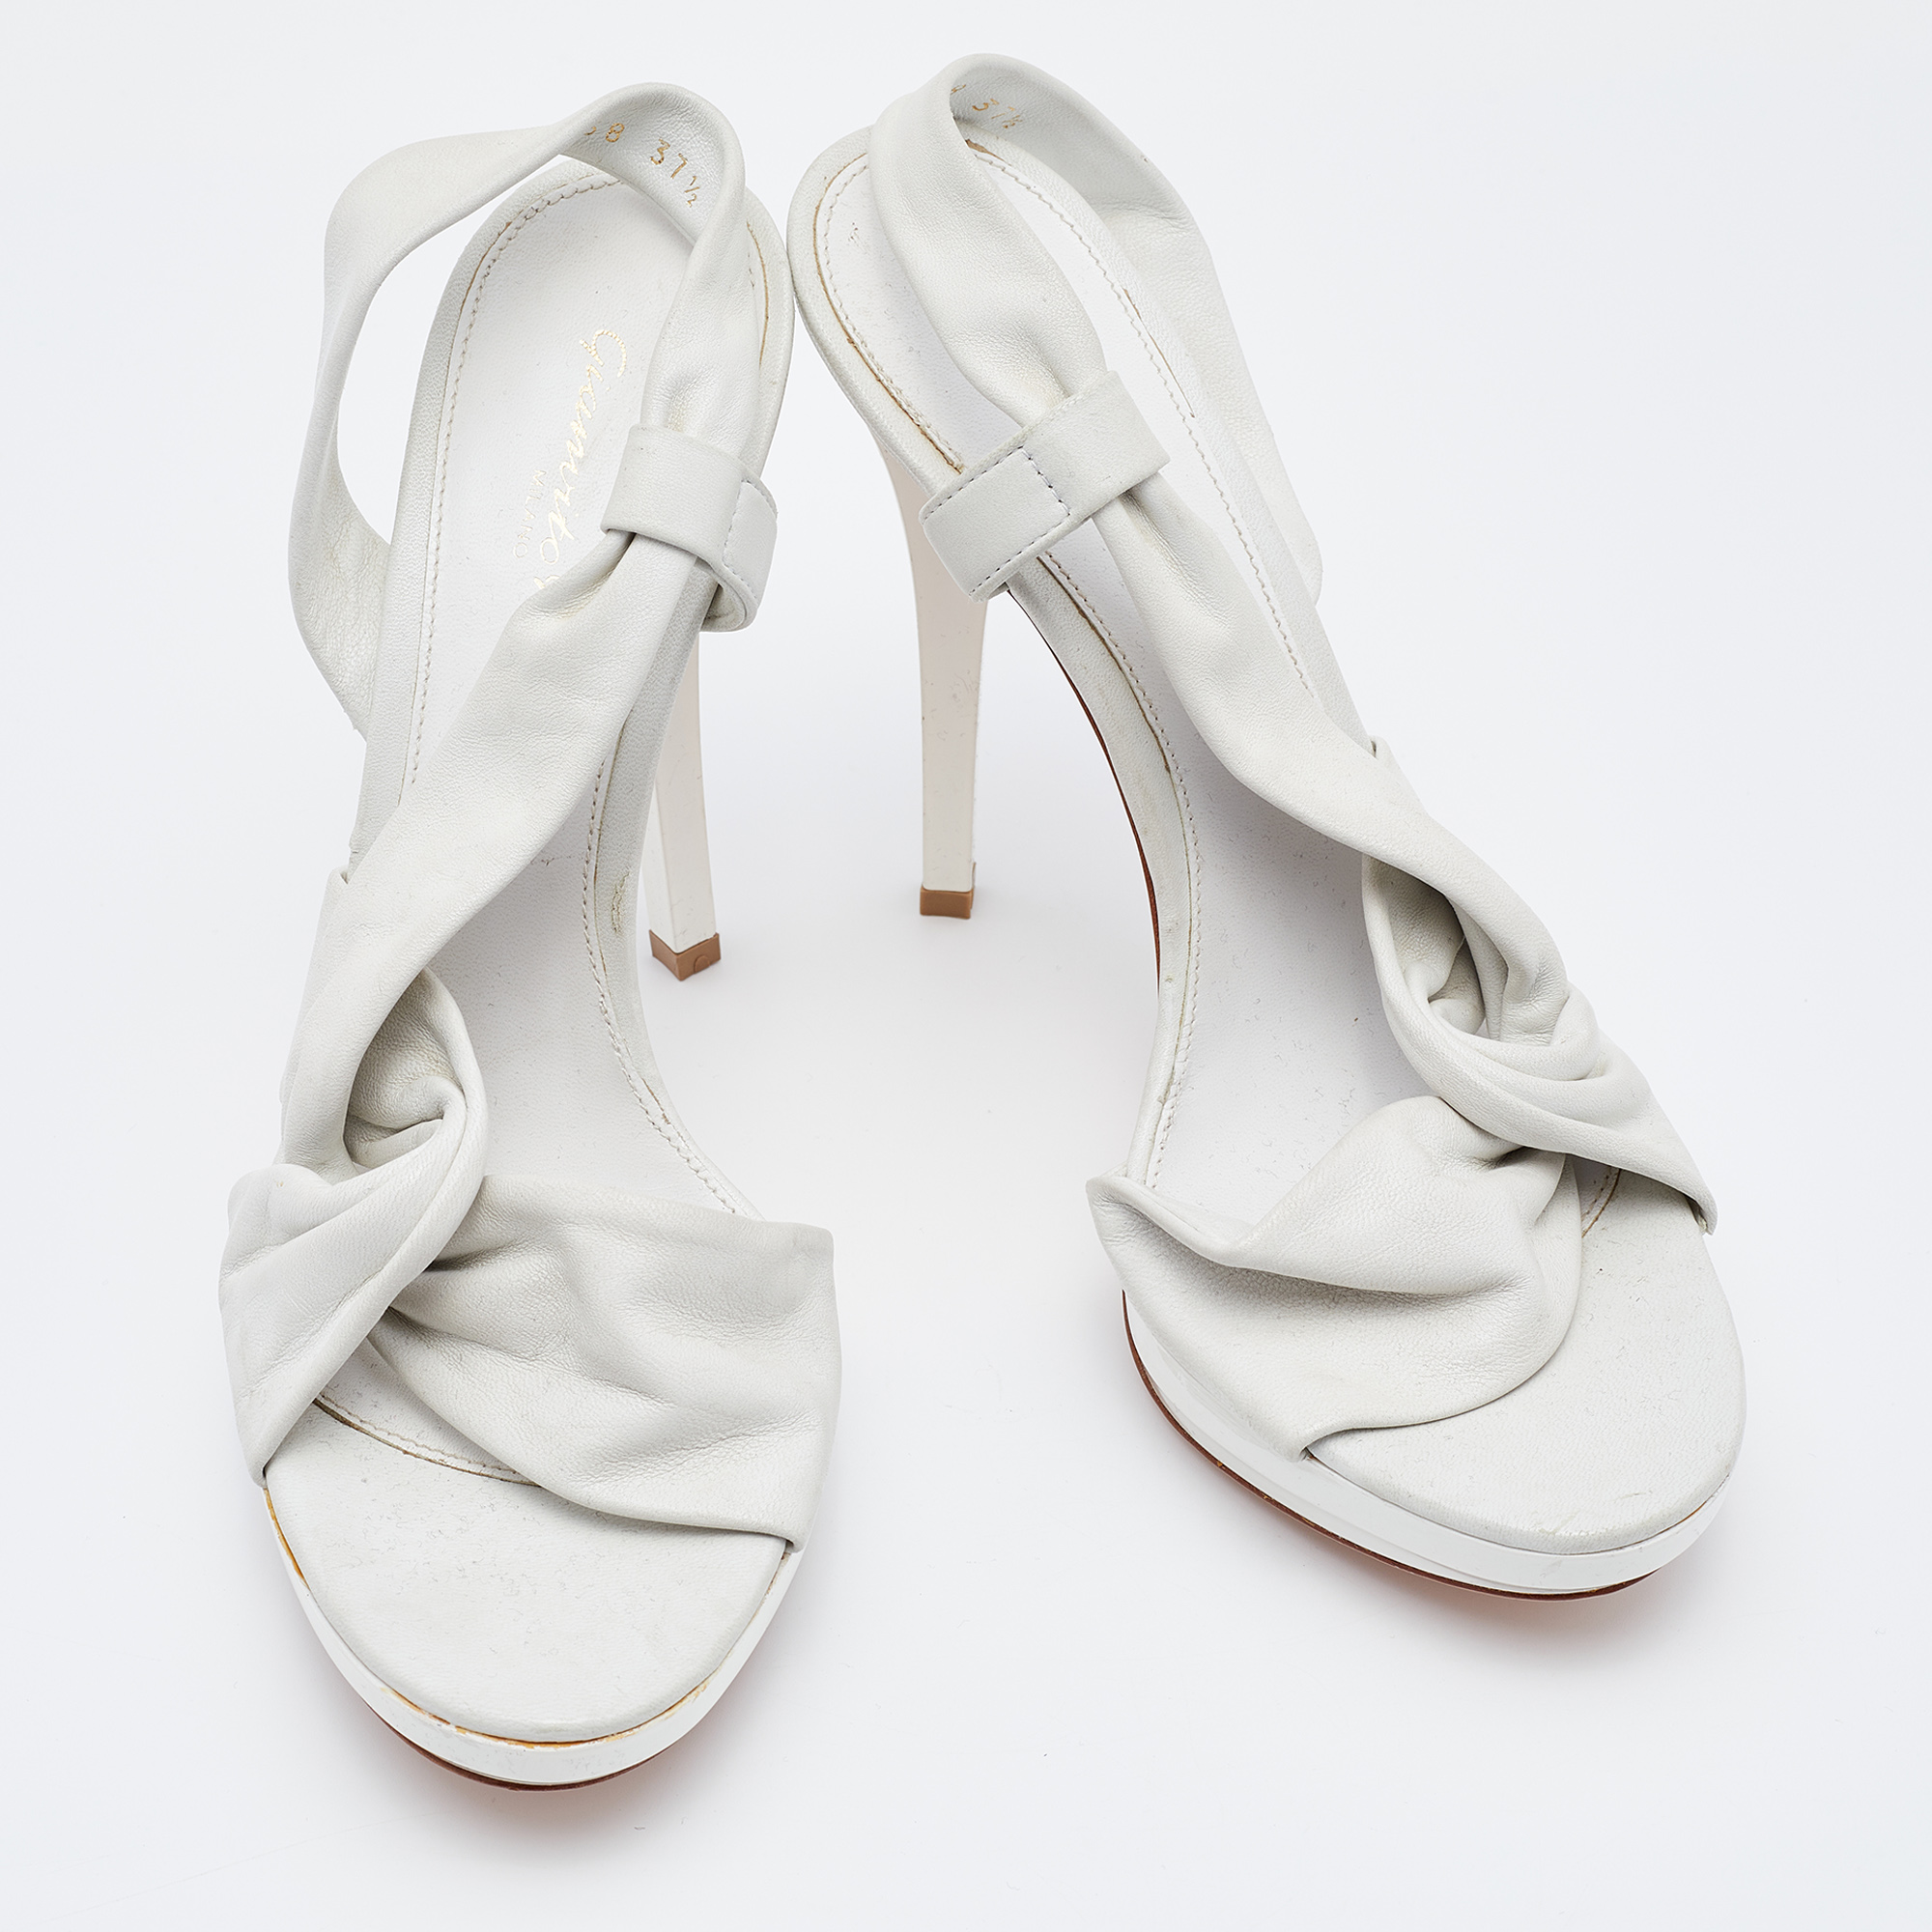 Gianvito Rossi White Leather Strappy Platfrom Sandals Size 37.5